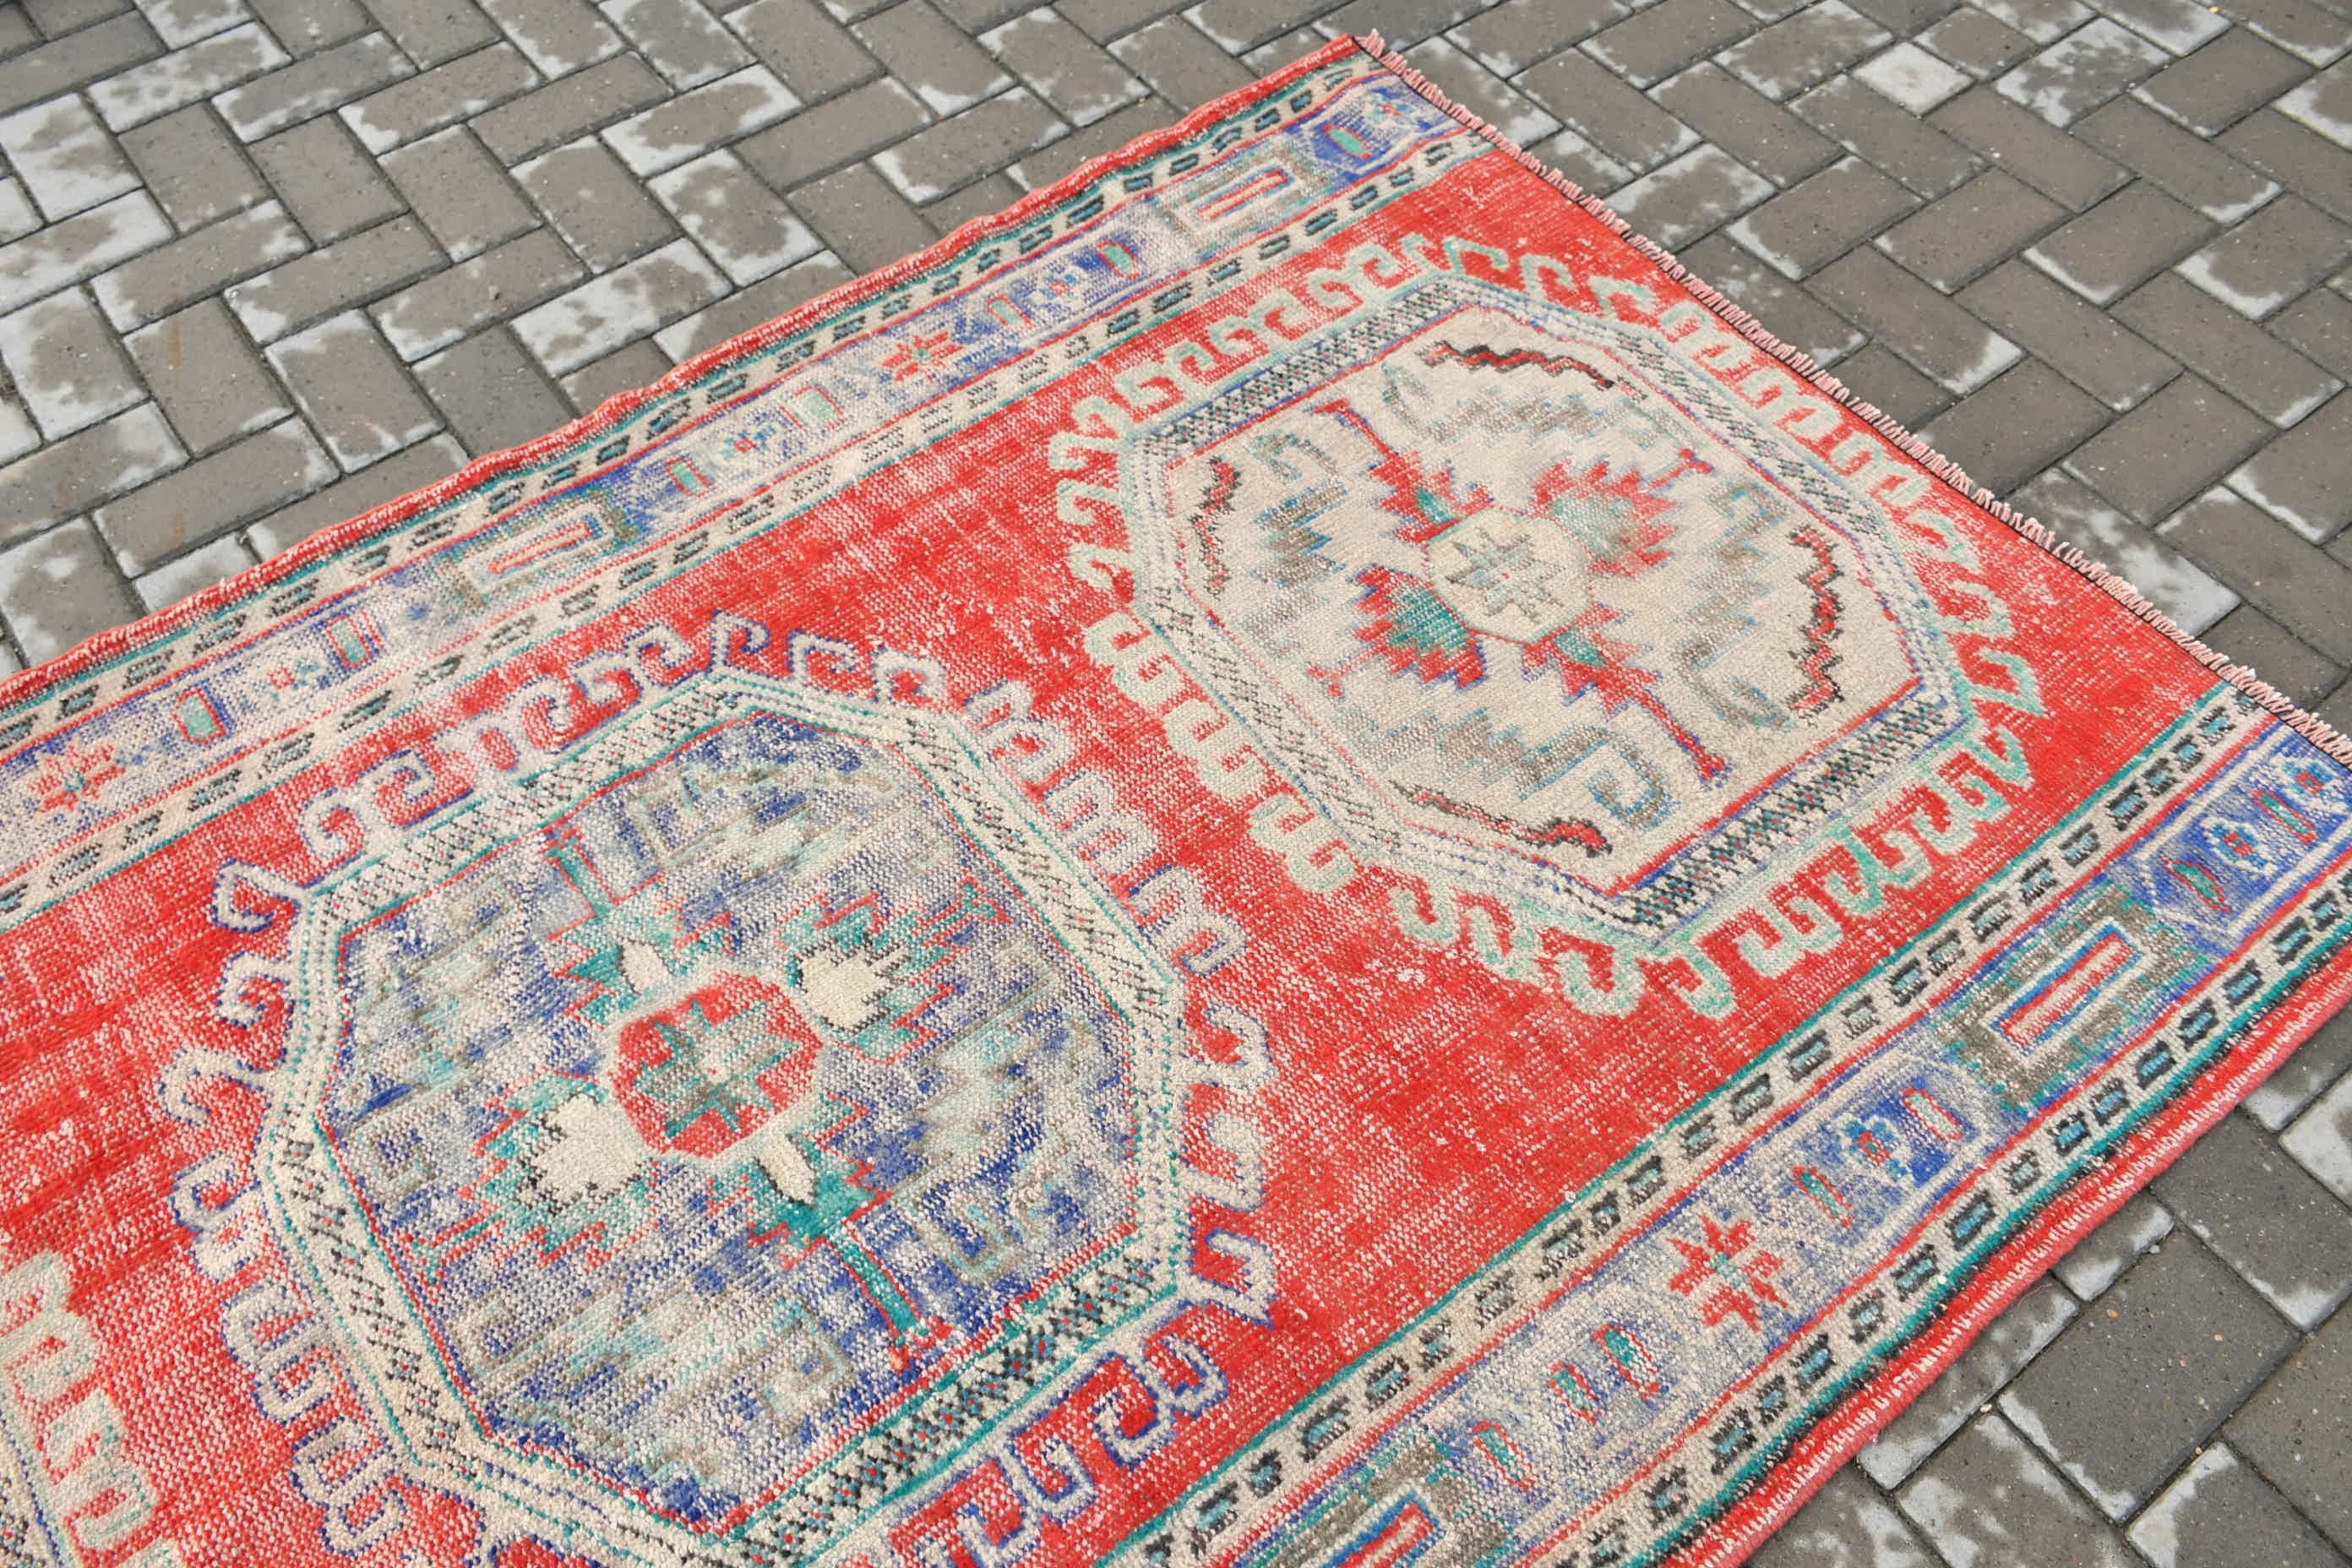 Home Decor Rug, 4.4x7.8 ft Area Rugs, Red Kitchen Rug, Moroccan Rugs, Dining Room Rug, Vintage Rug, Rugs for Floor, Turkish Rugs, Cute Rug